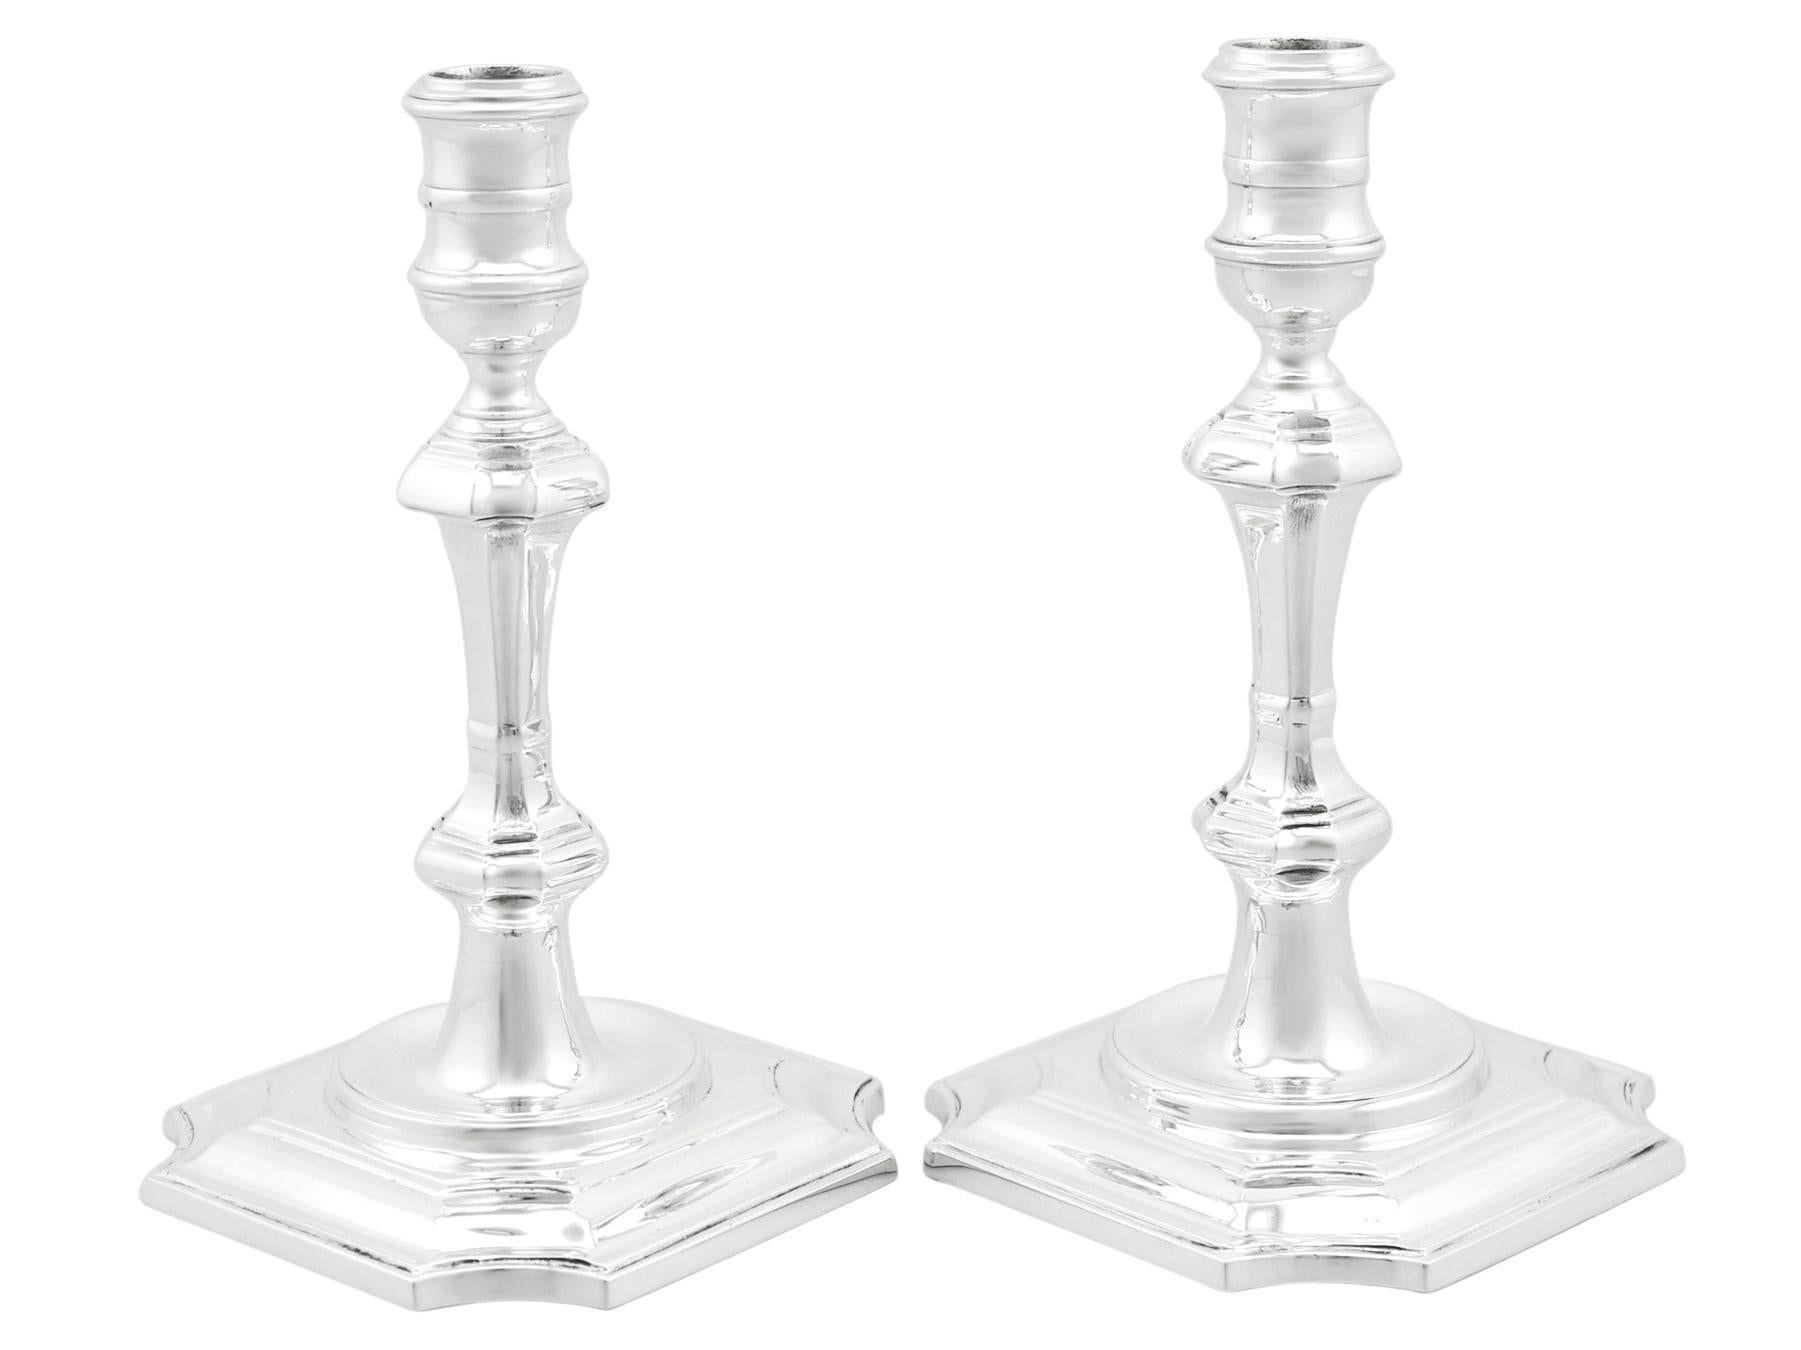 An exceptional, fine and impressive pair of vintage English cast sterling silver candlesticks; an addition of our ornamental silverware collection.

These exceptional vintage English sterling silver candlesticks have a plain classical 18th century